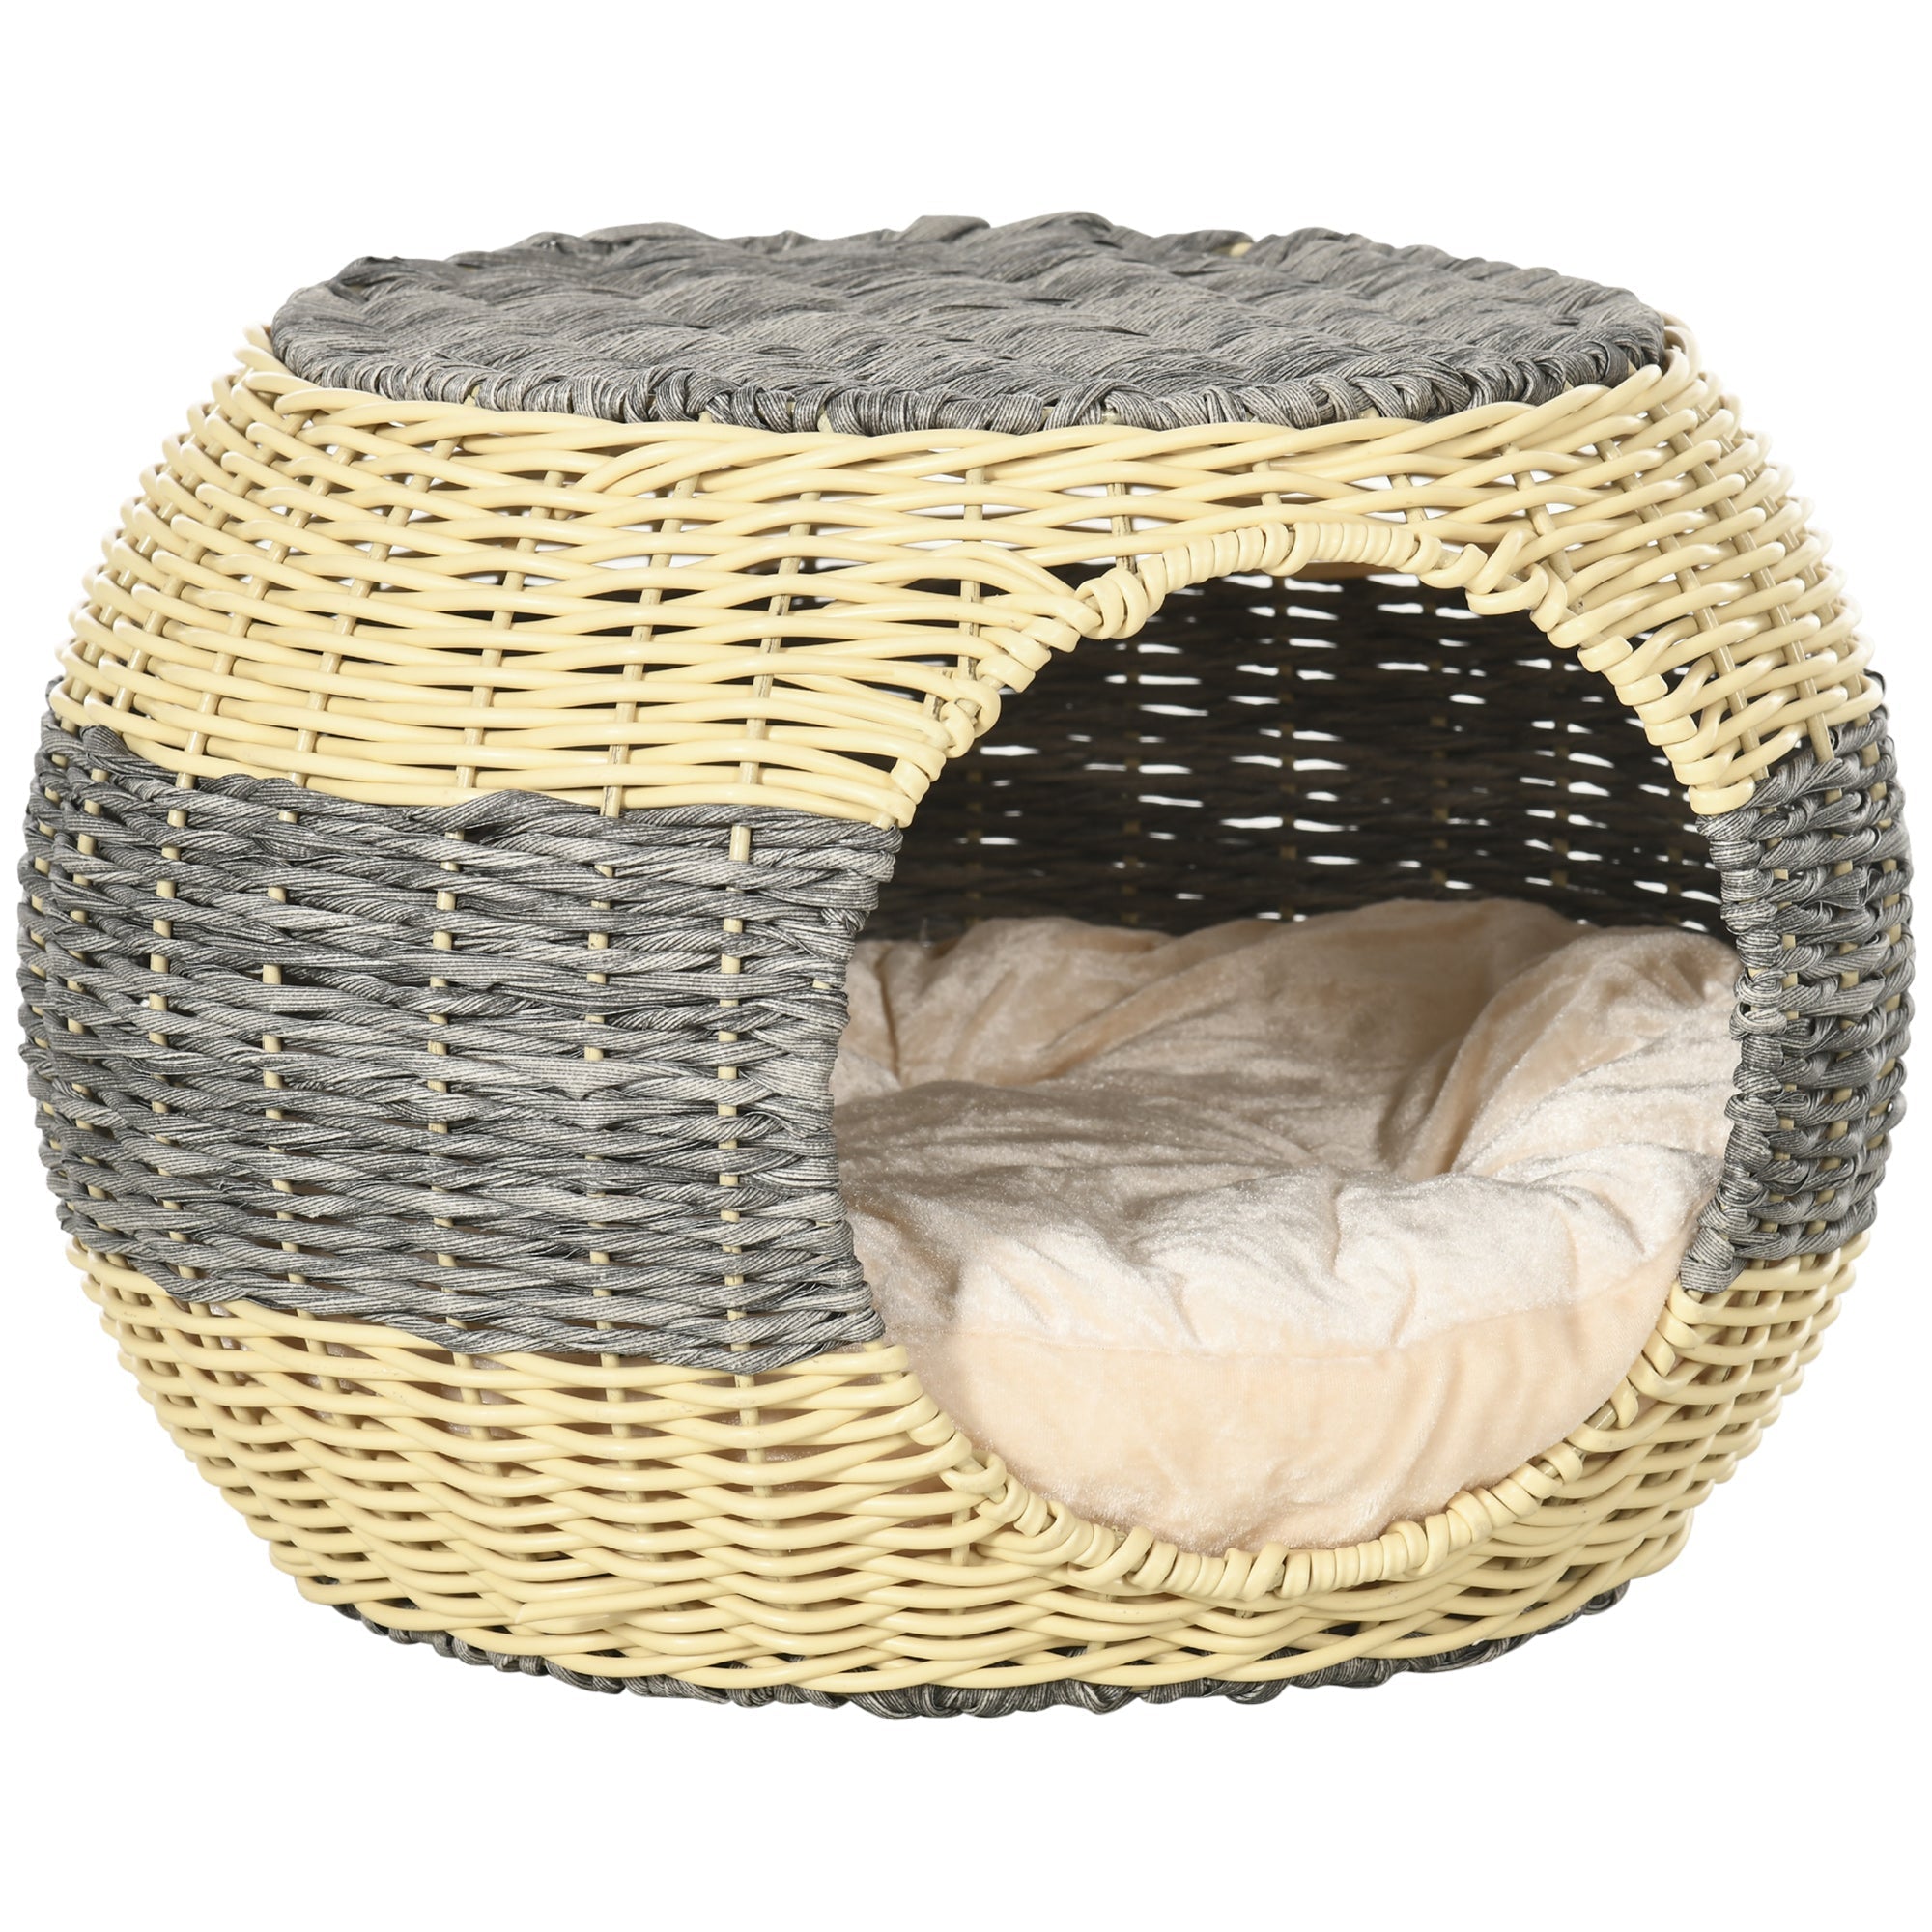 Cosy Rattan Cat Cave: Stylish Raised Bed with Cushion, PawHut,